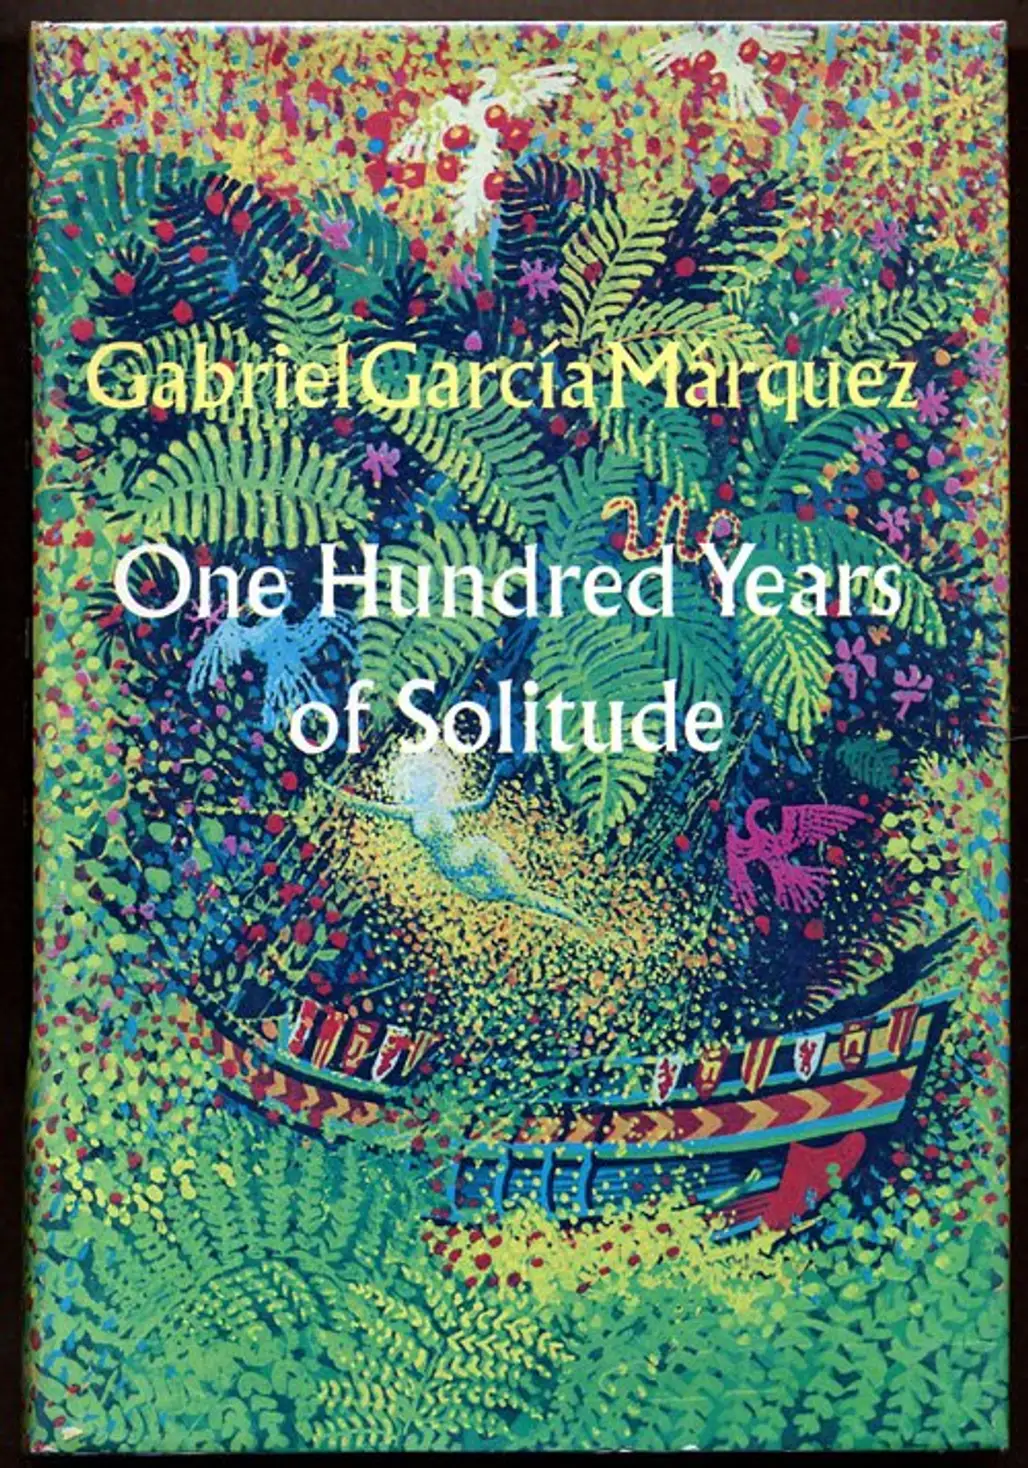 One Hundred Years of Solitude – Gabriel Garcia Marquez